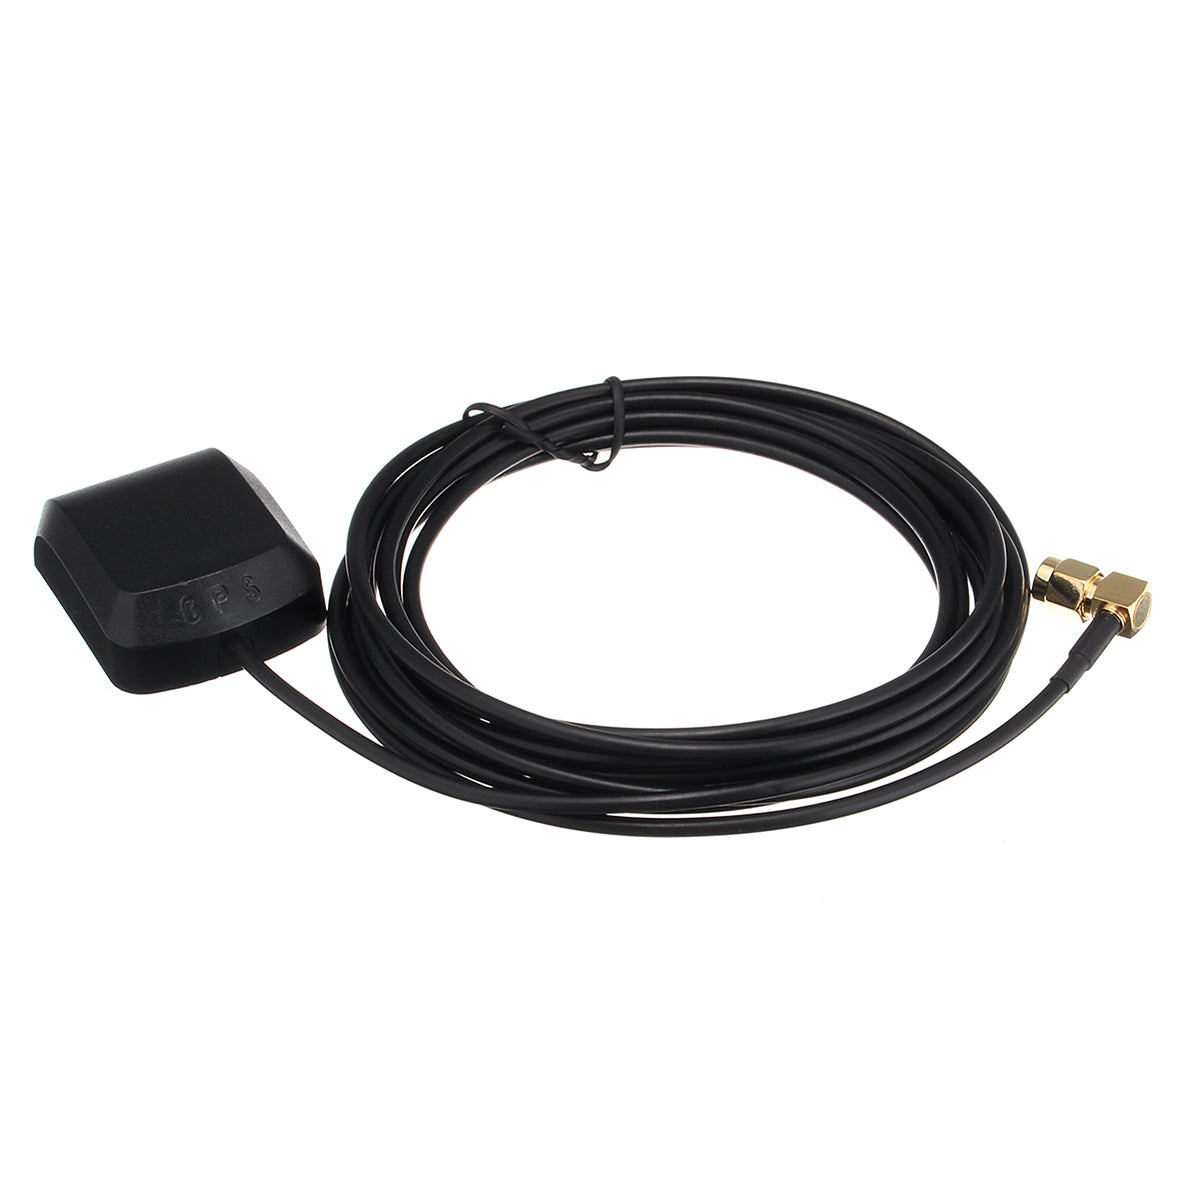 External GPS GLONASS Antenna Receiver Positioning Aerial Curved SMA Male Connector 3 Meters for Car Navigation - Auto GoShop